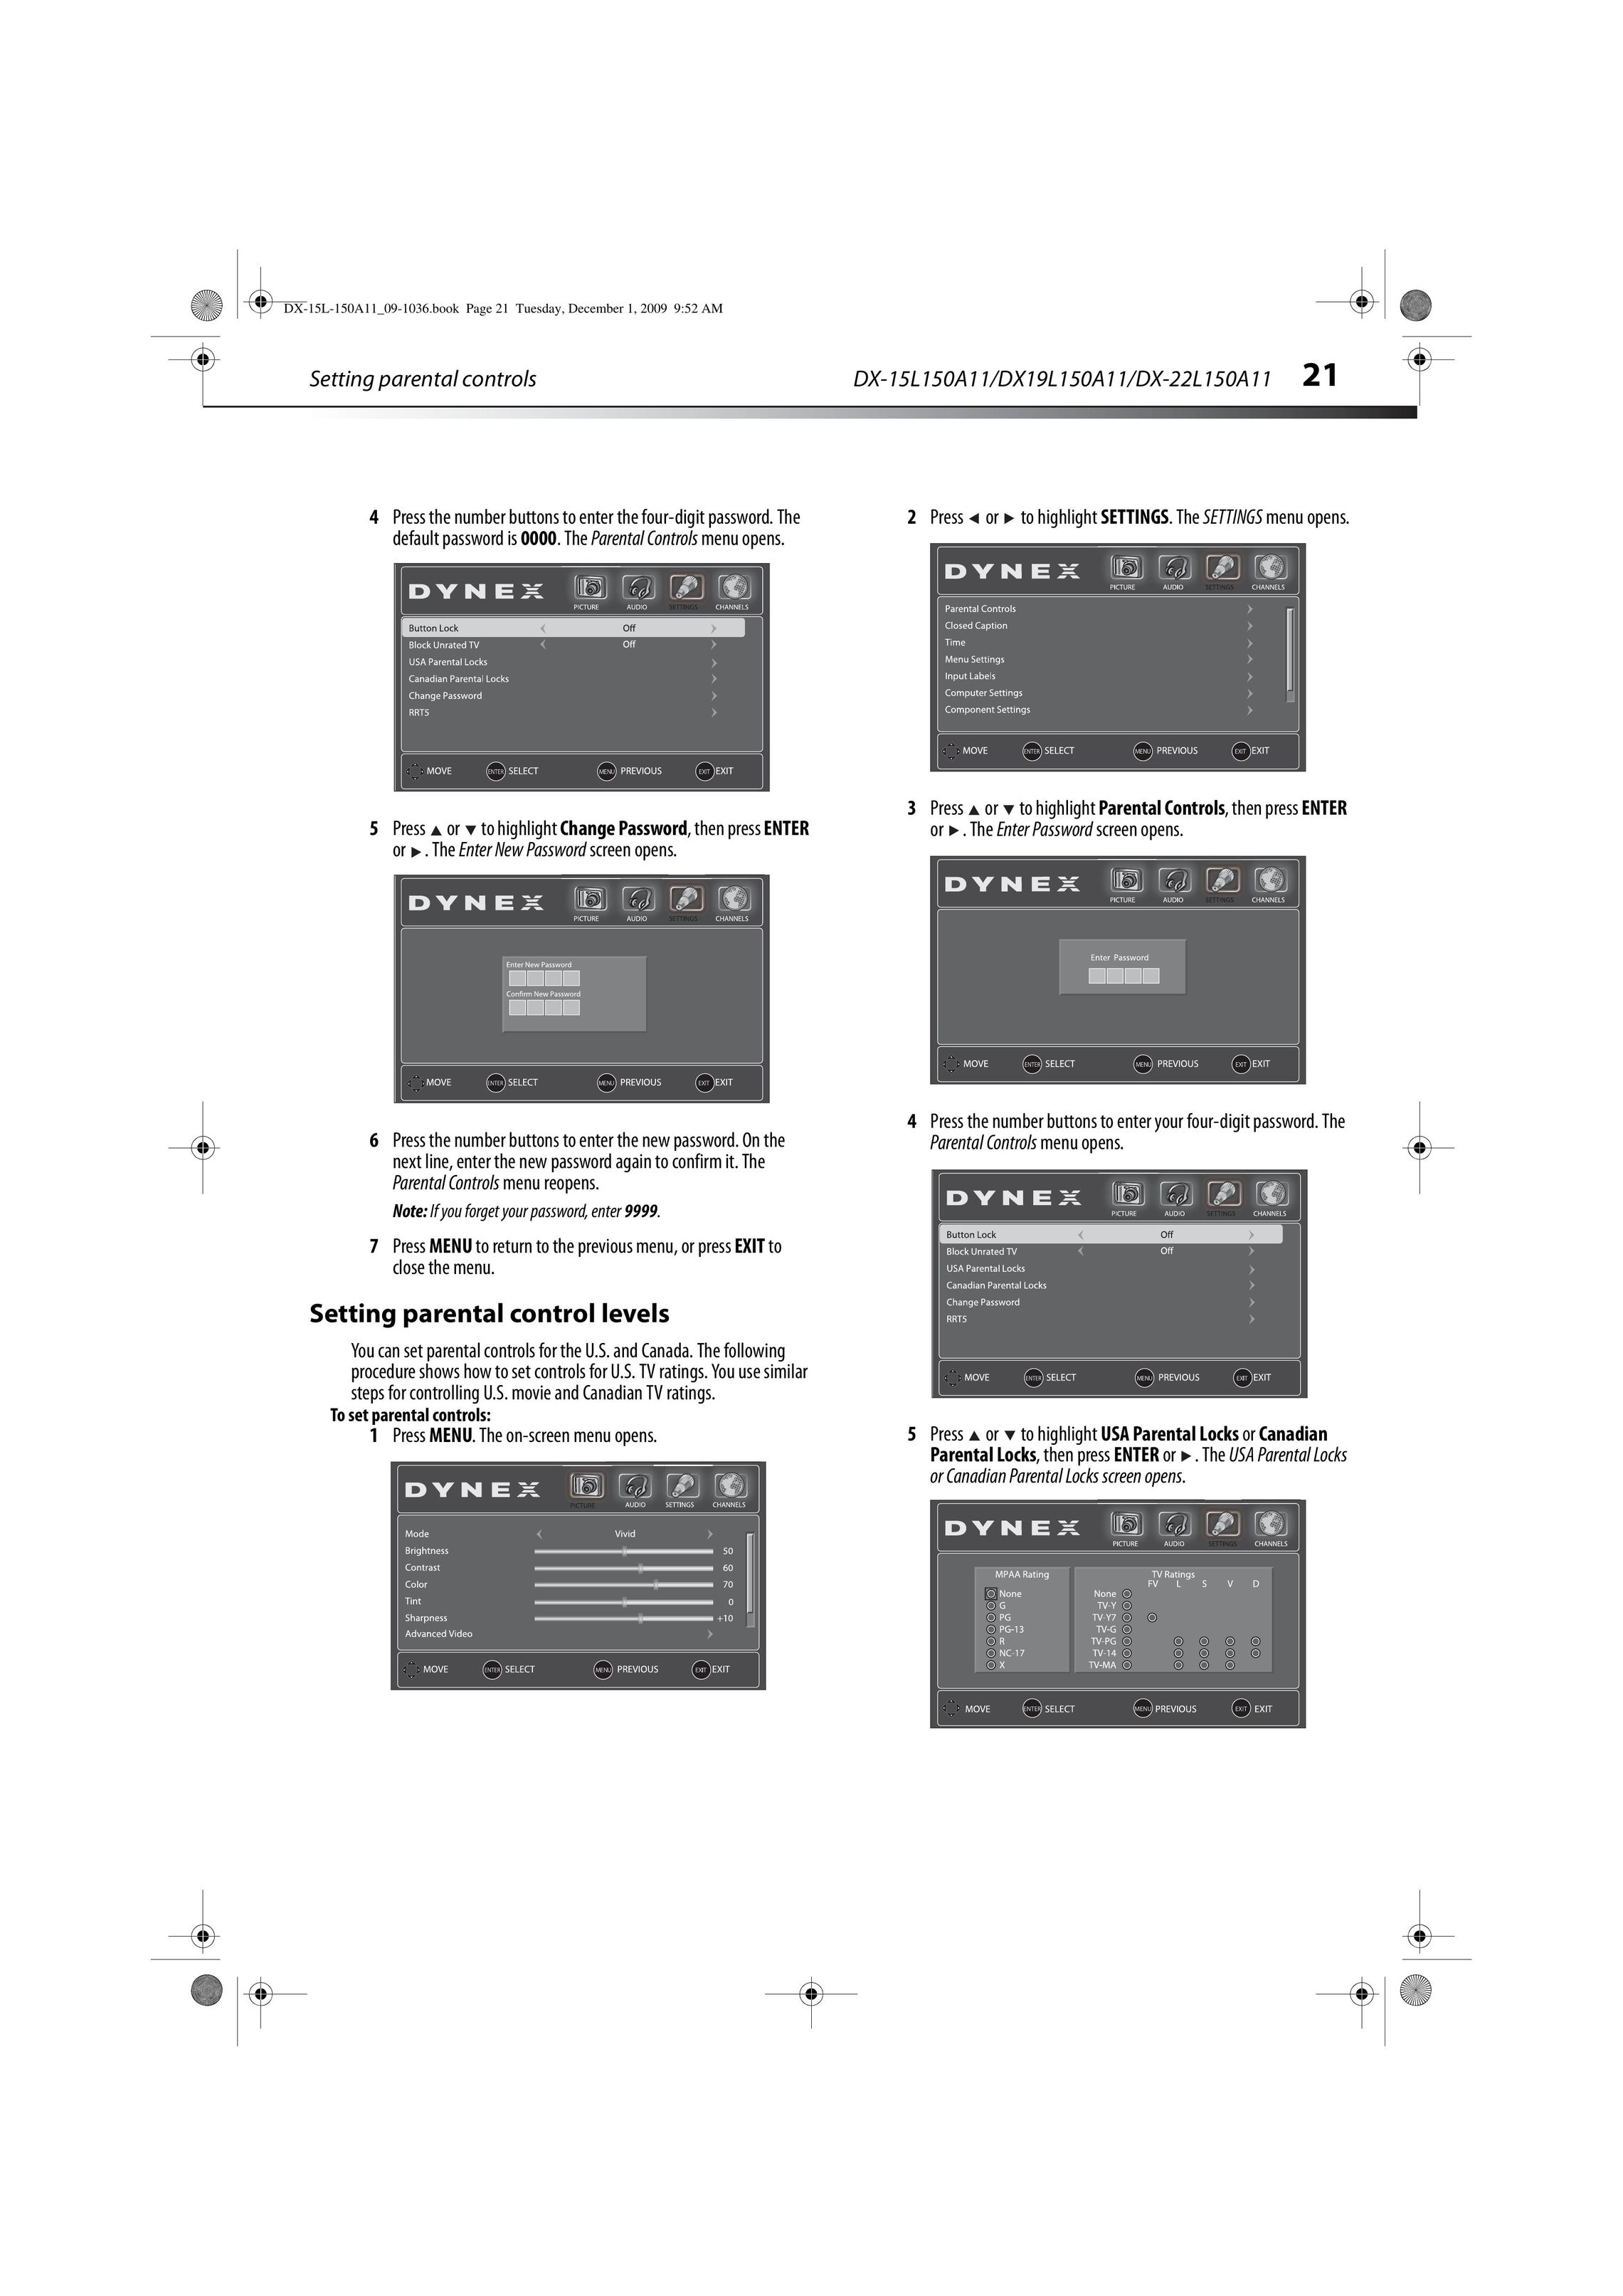 Dynex DX-22L150A11 Flat Panel Television User Manual (Page 24)